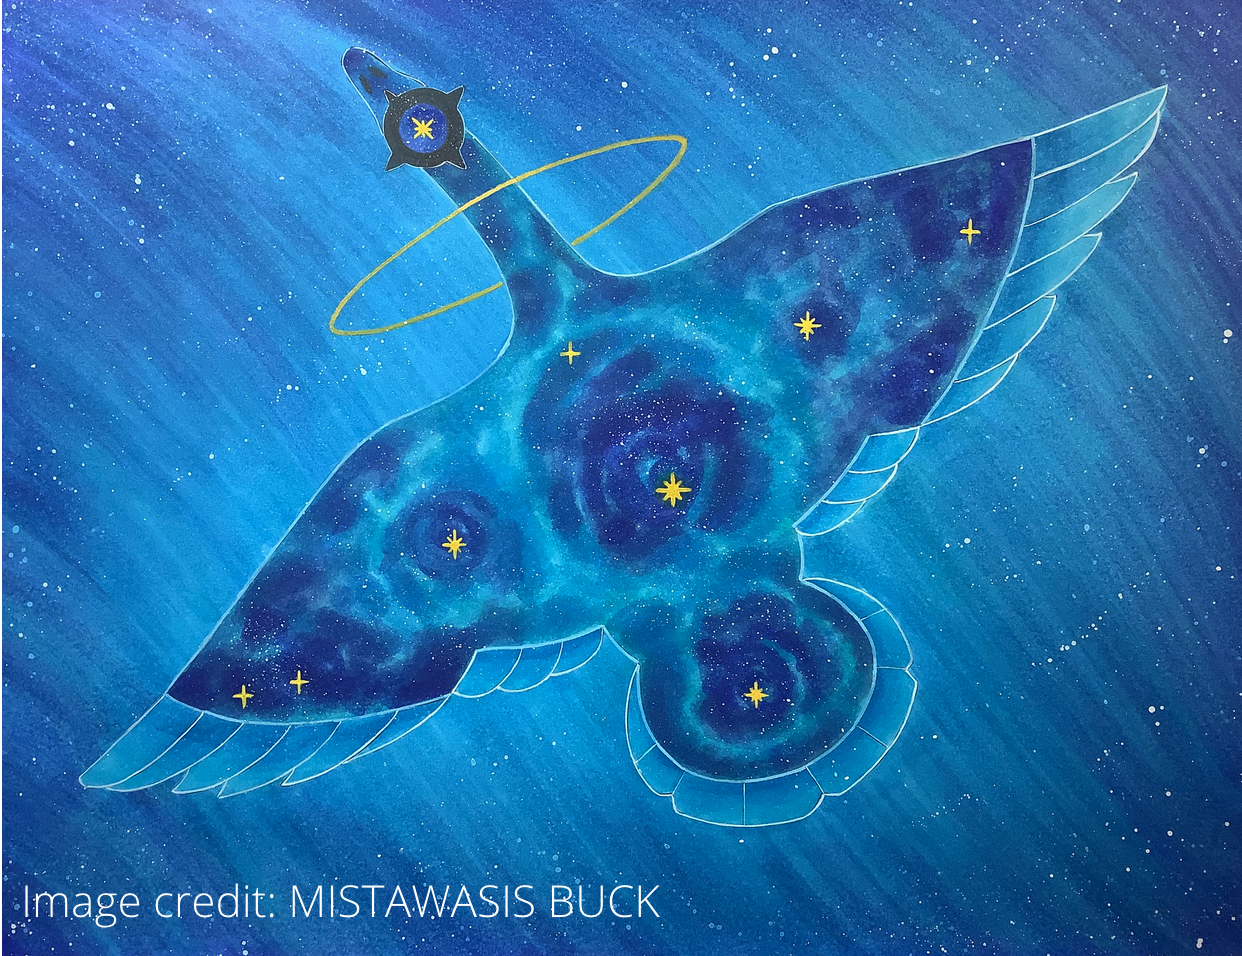 Painting of Indigenous constellation, image credit Mistawasis Buck